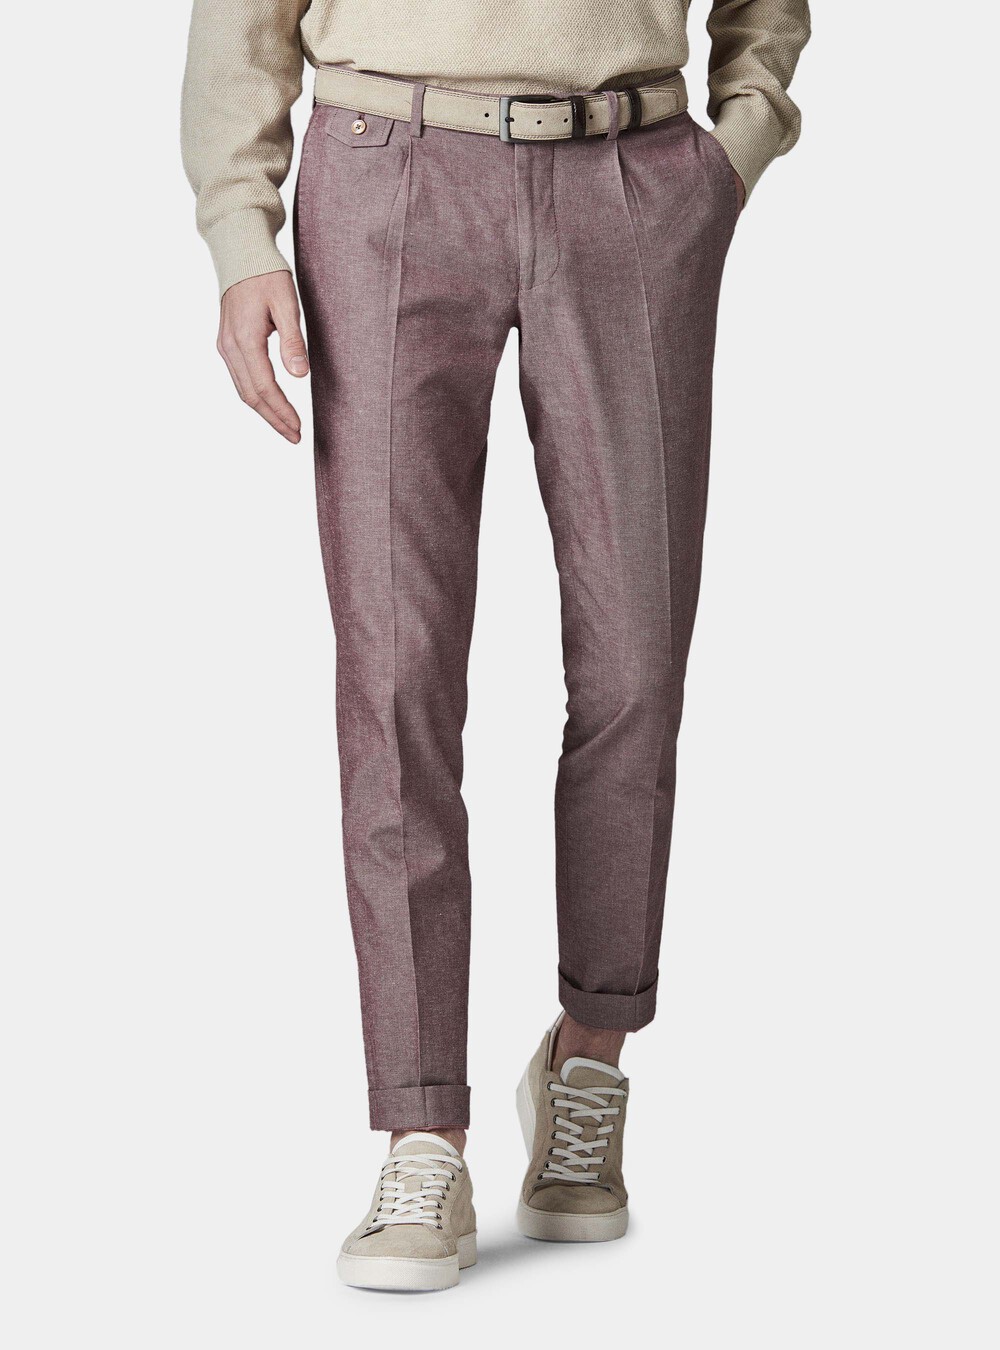 Blend linen with pinces trousers